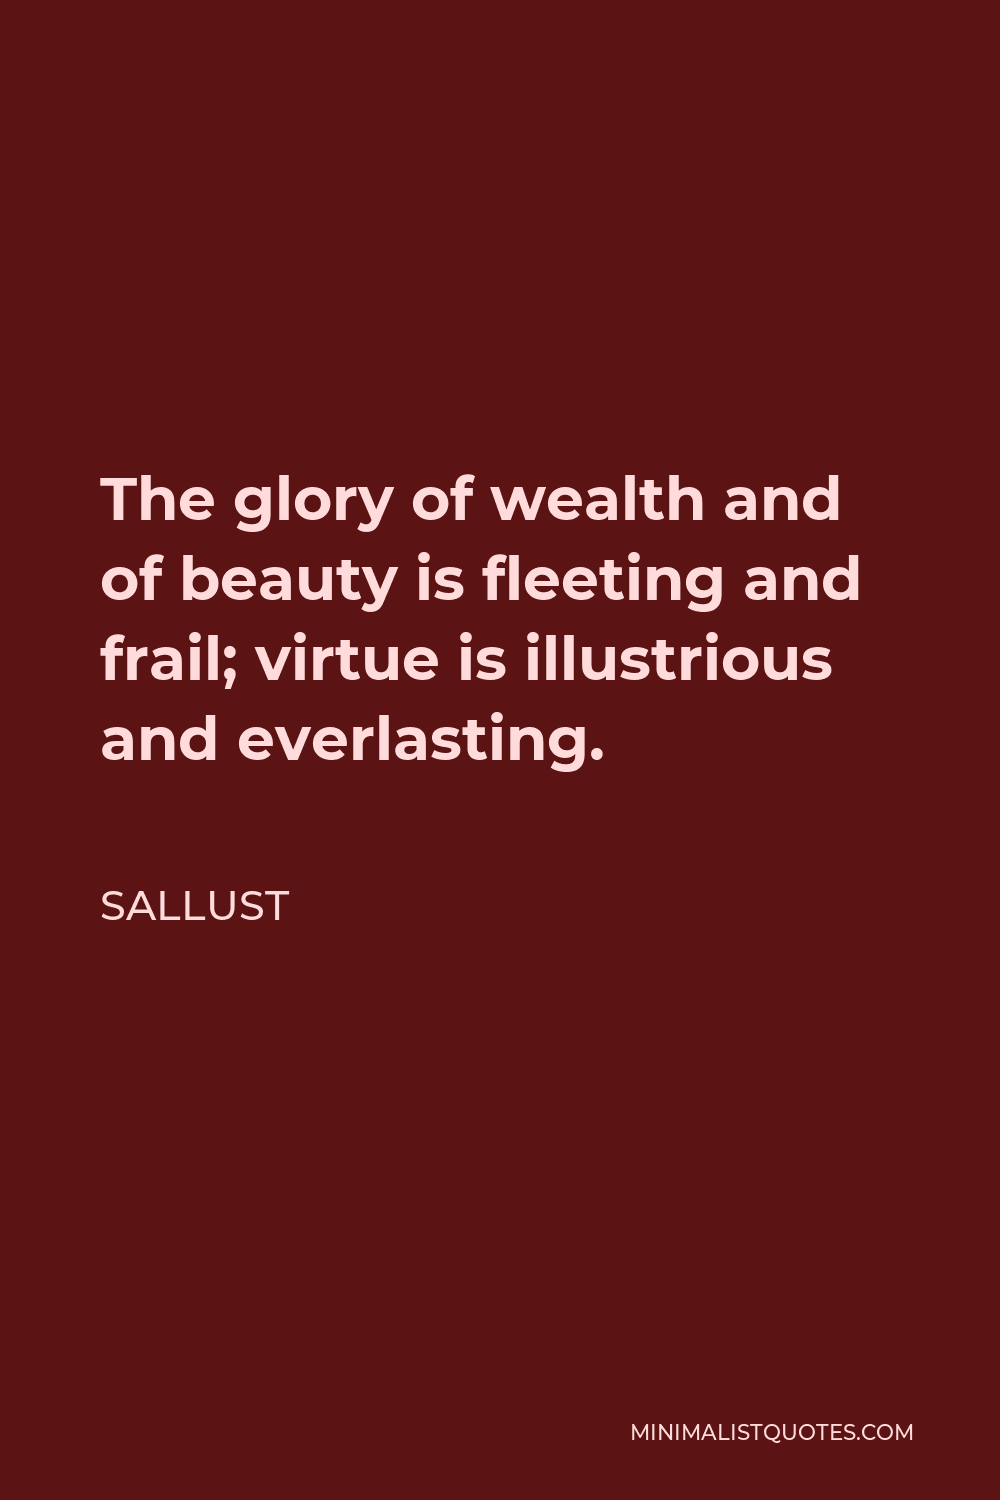 Sallust Quote - The glory of wealth and of beauty is fleeting and frail; virtue is illustrious and everlasting.